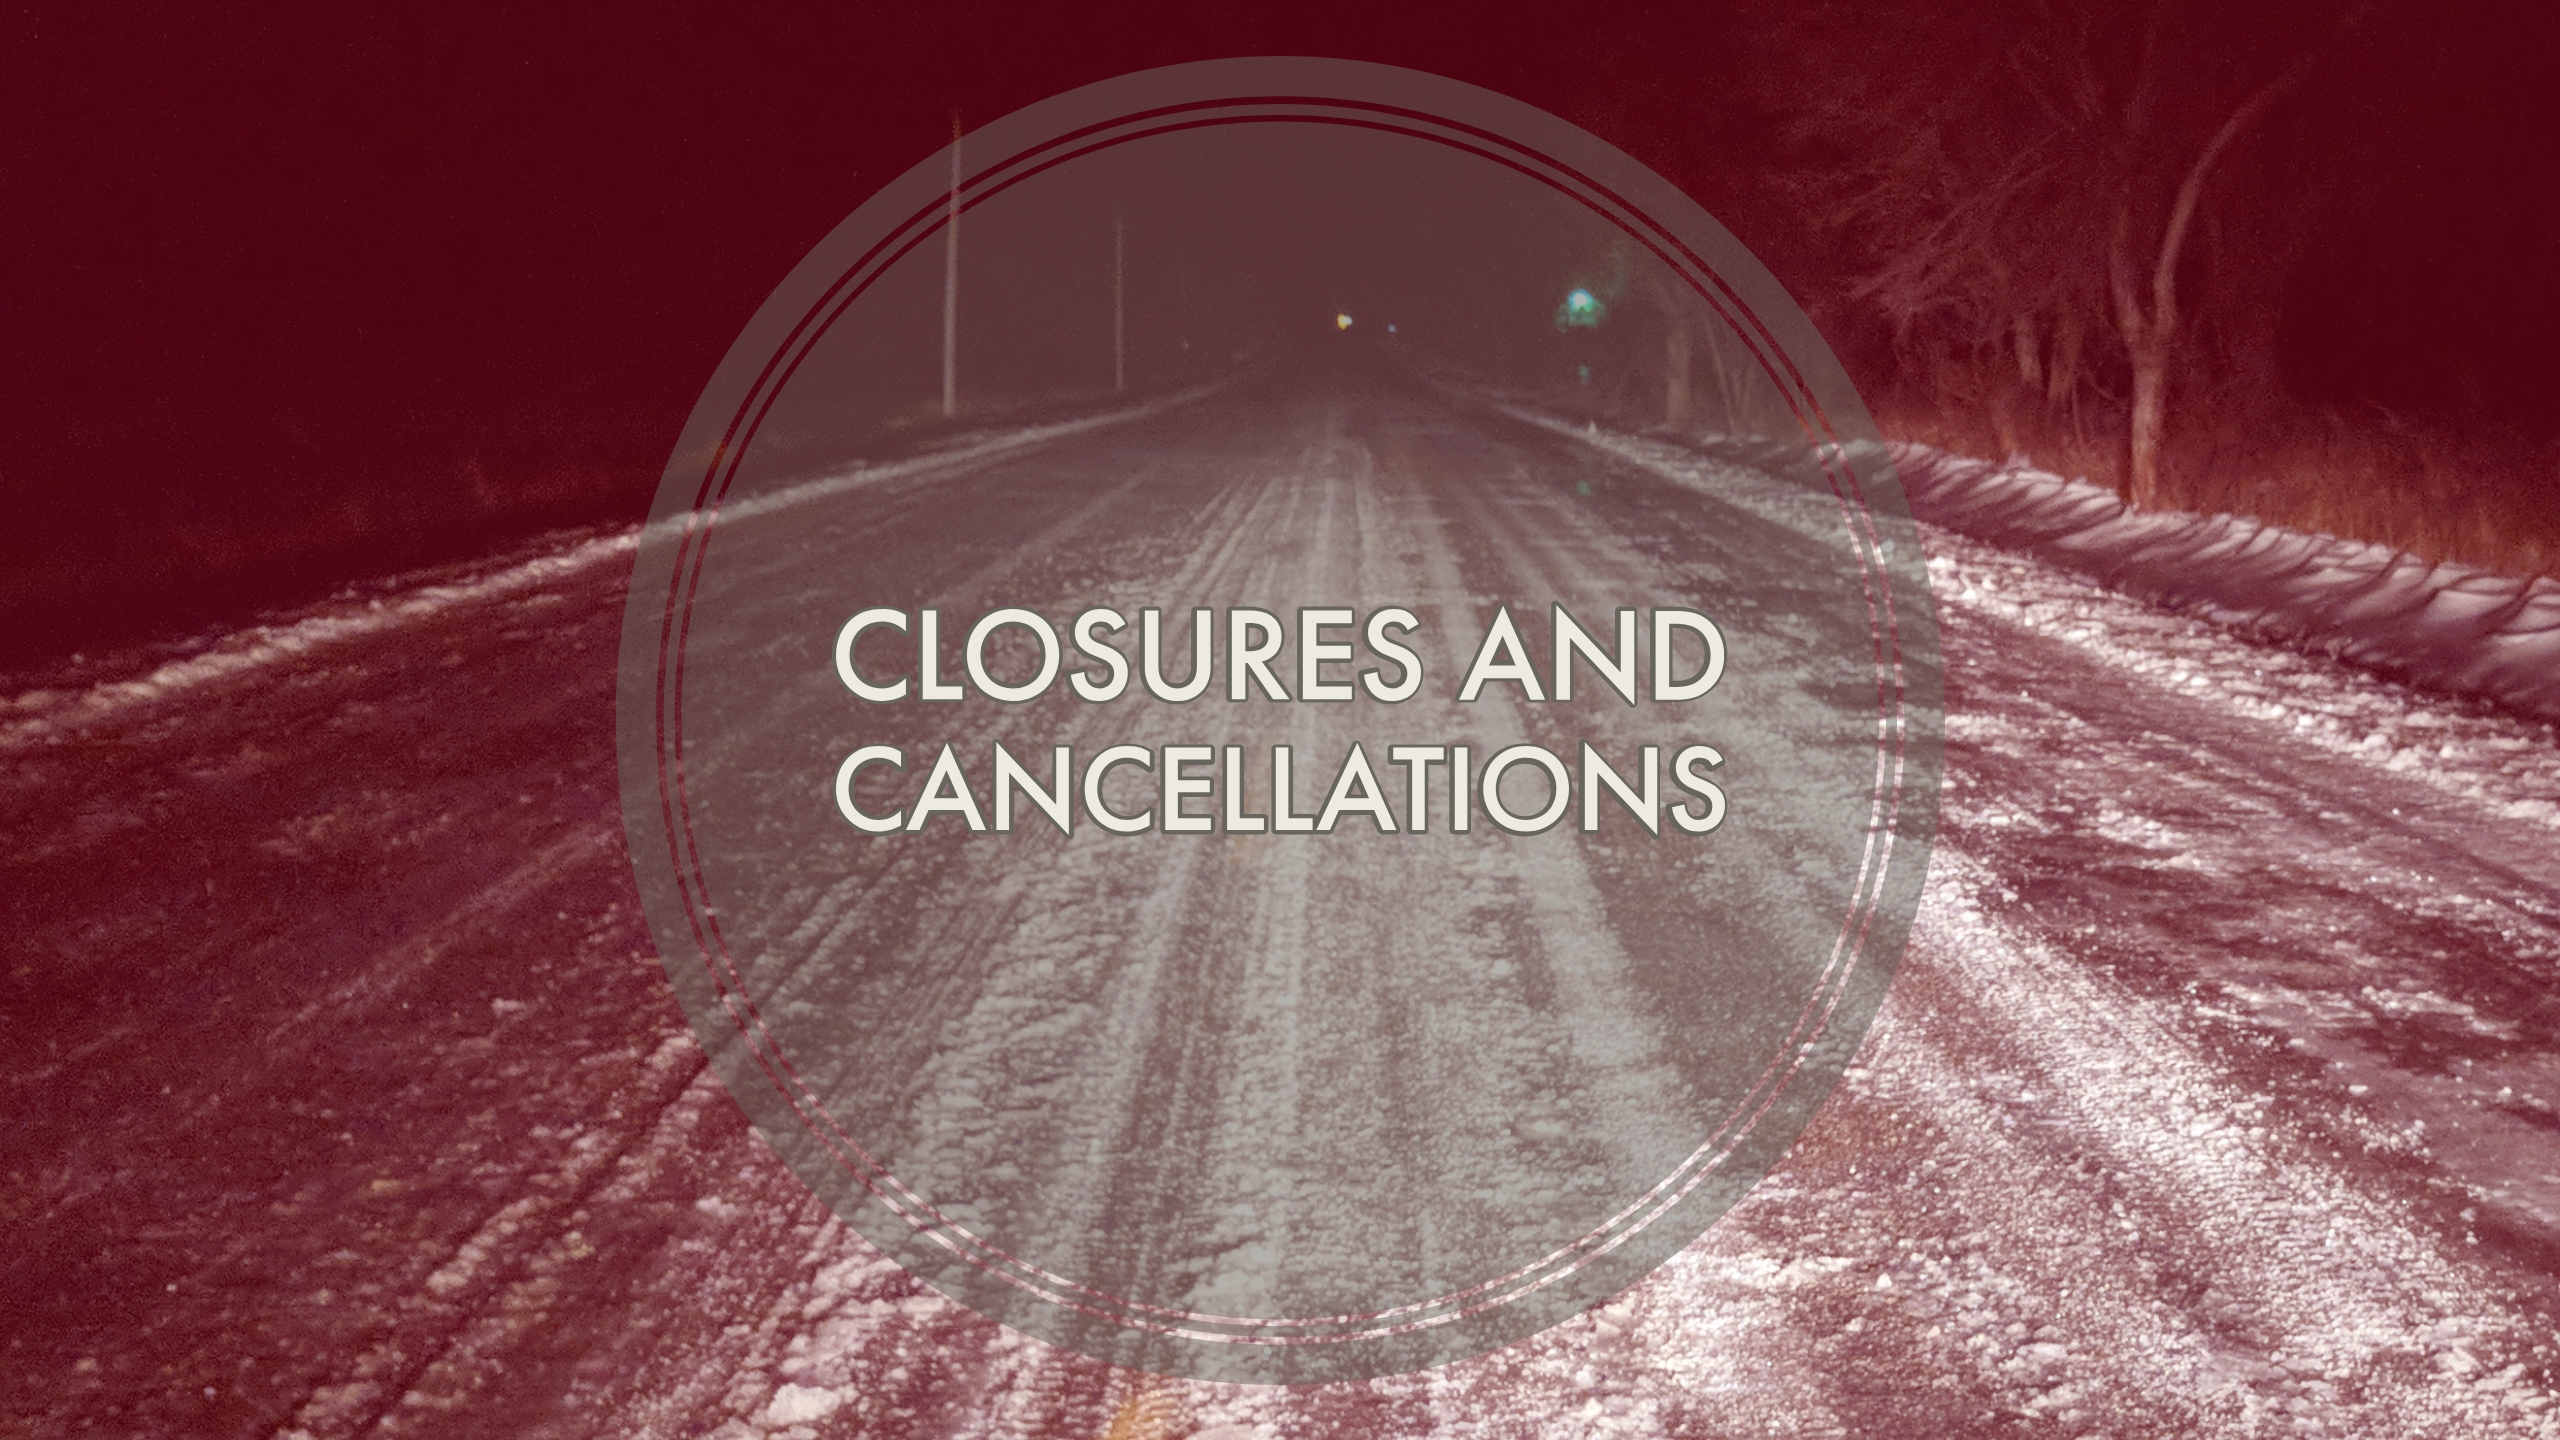 Closures and Cancellations - My Prescott Now2560 x 1440